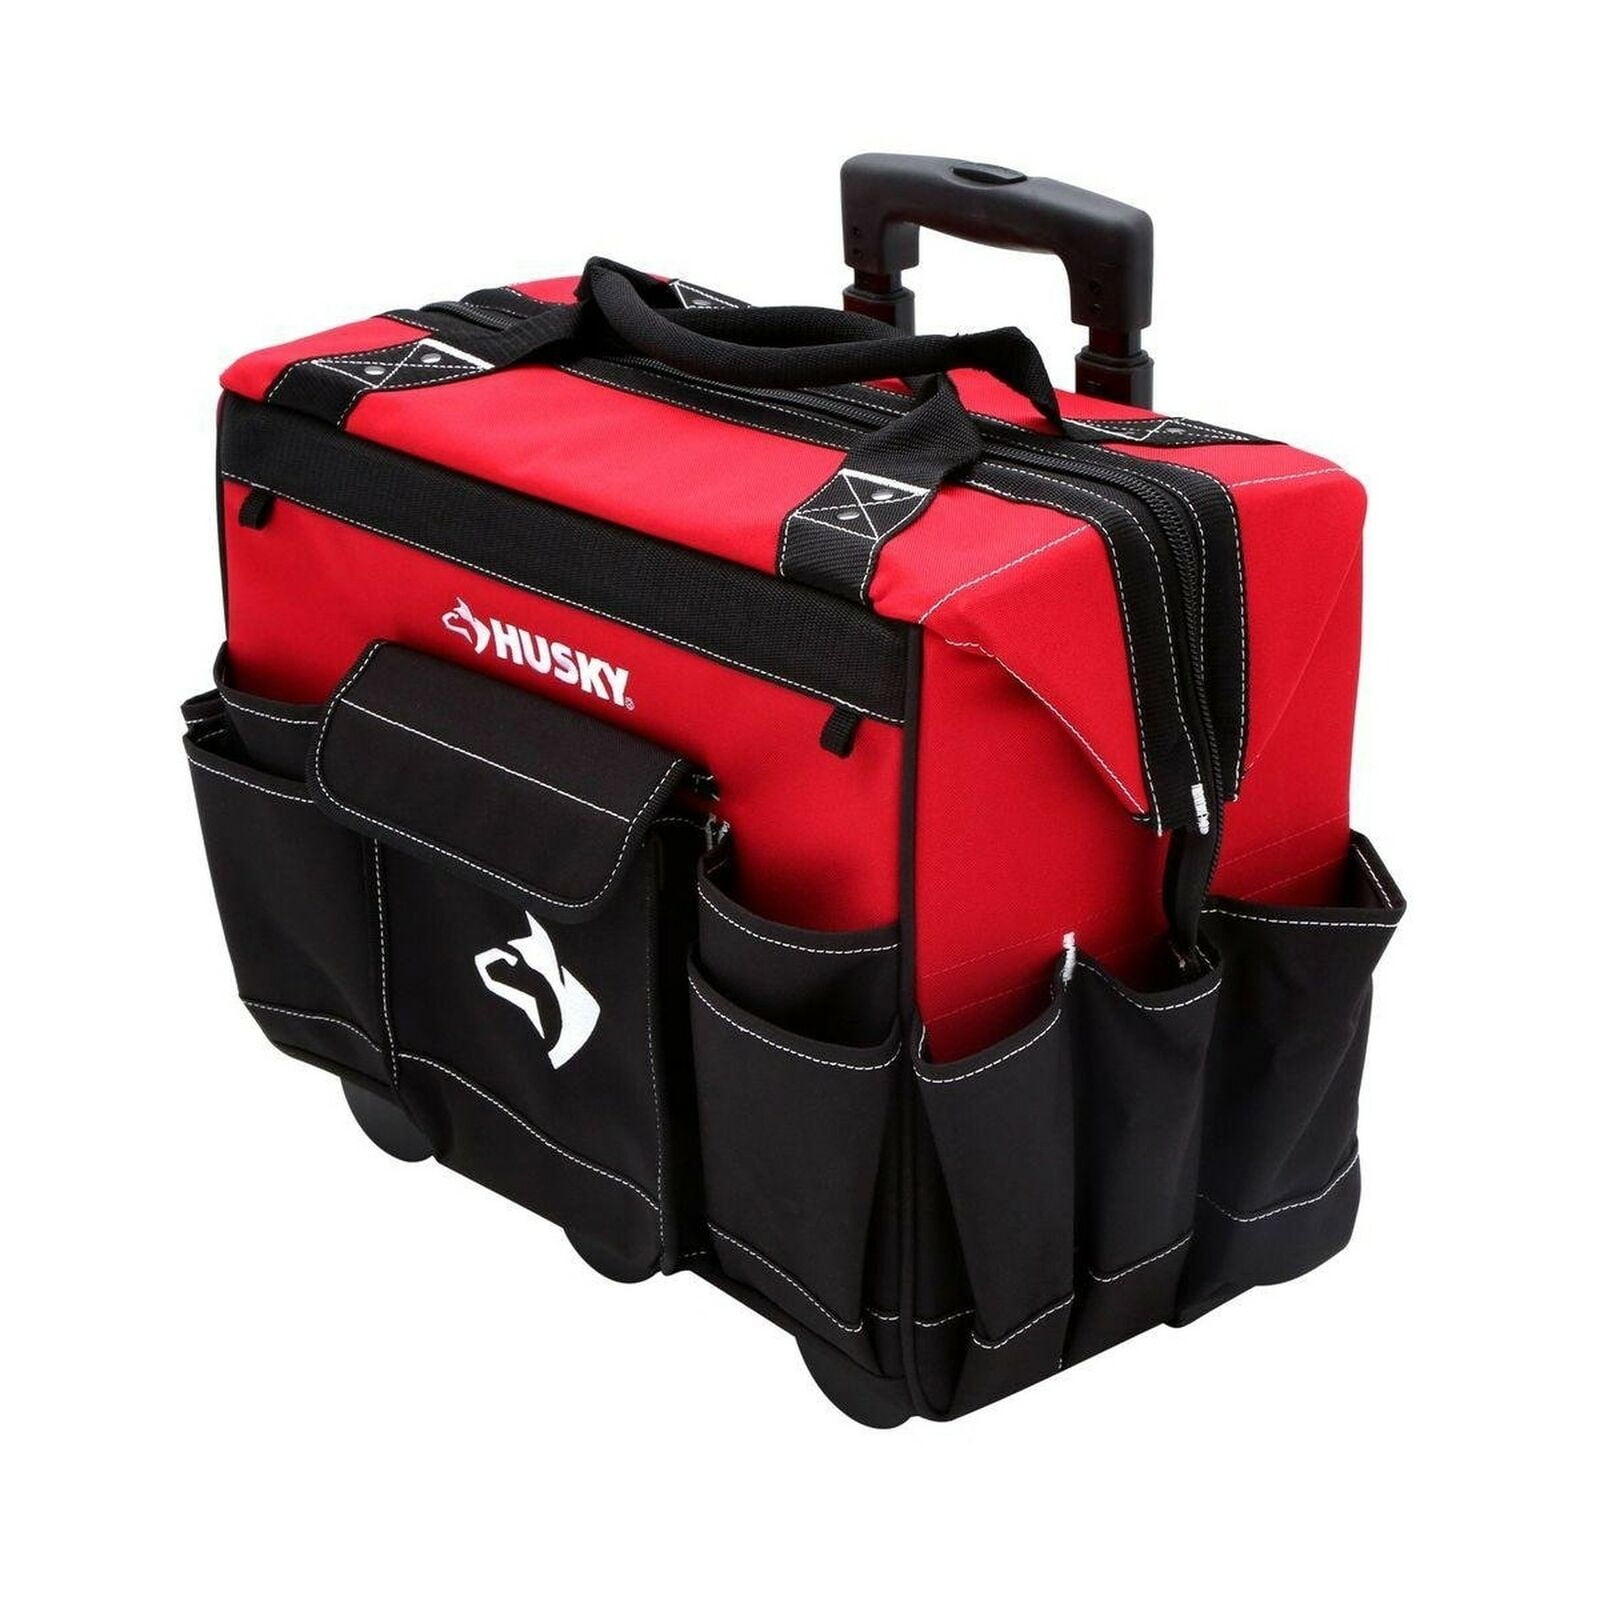 Is Husky's Rolling Tool Bag Worth the Extra Money? Find Out Here